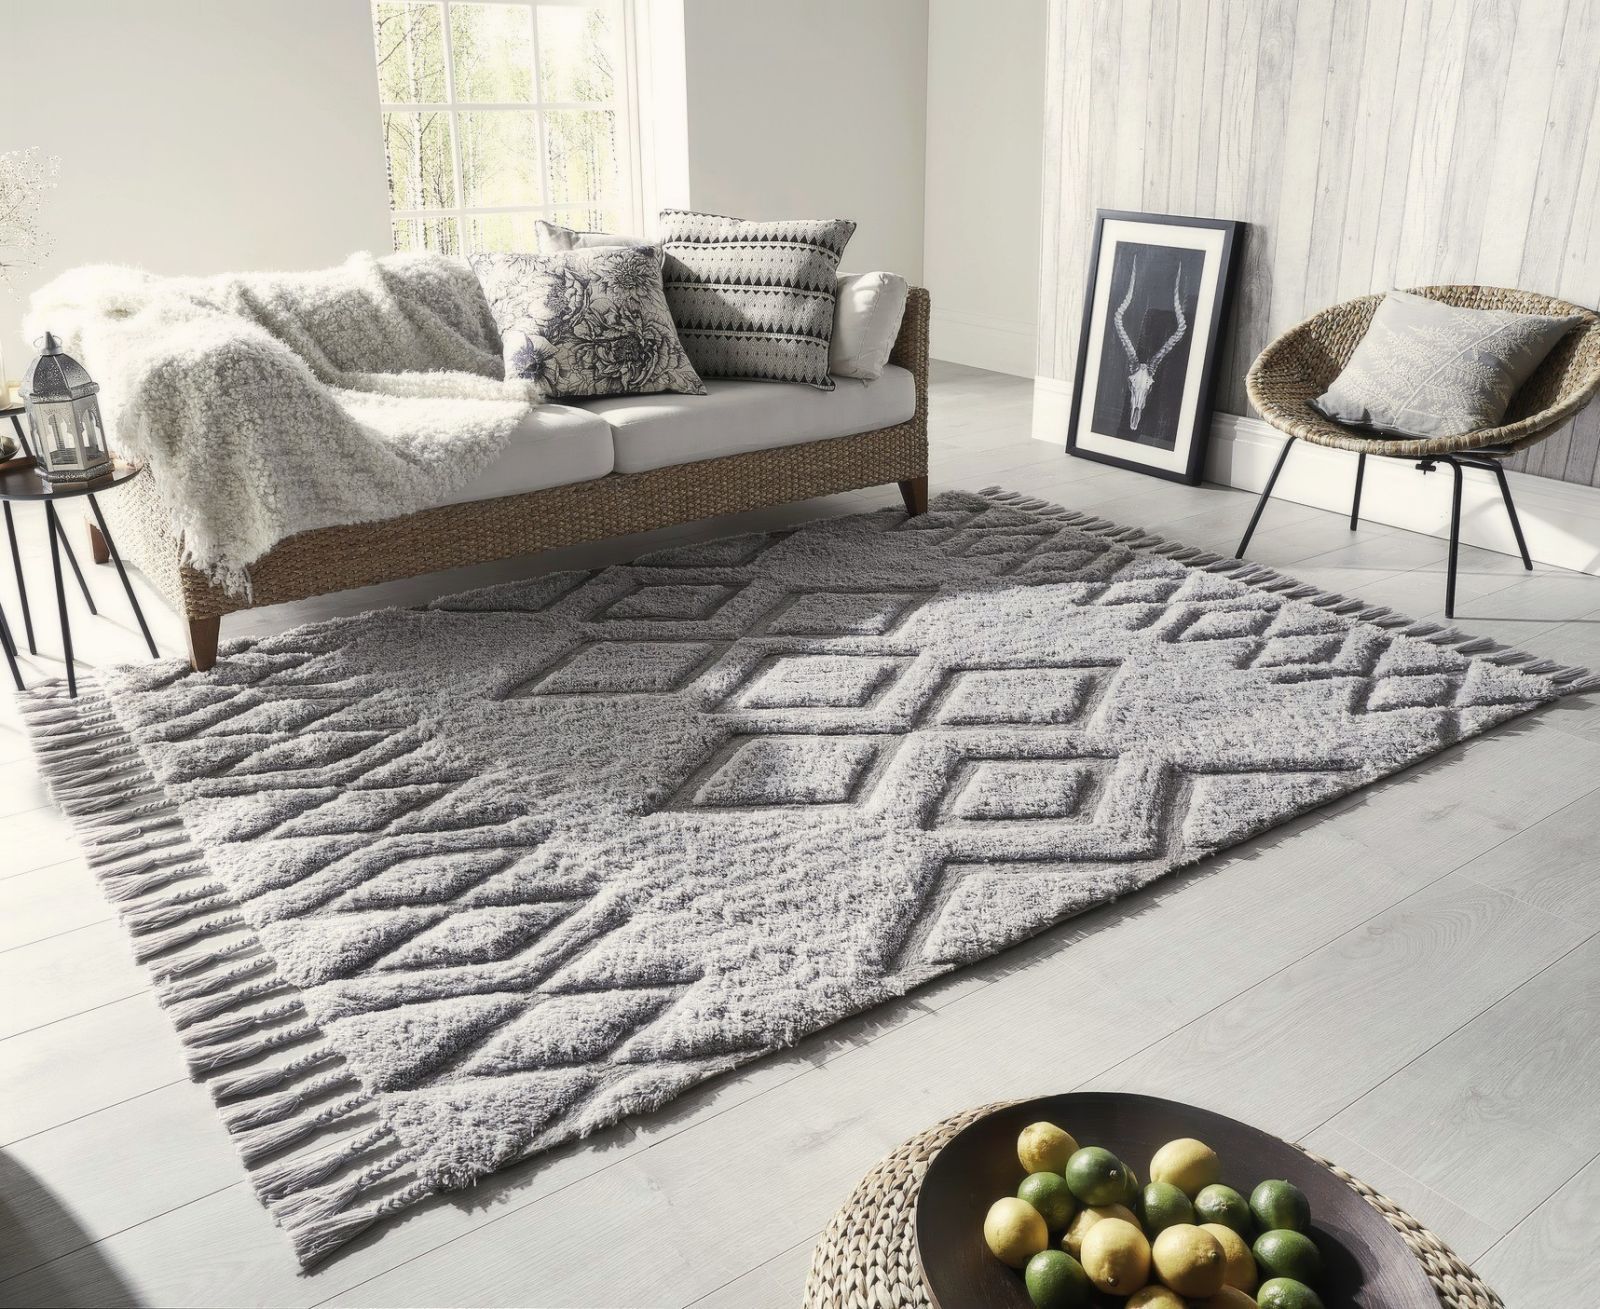 10 of the Best Grey Rugs - Large Rugs For Living Room, Bedroom and